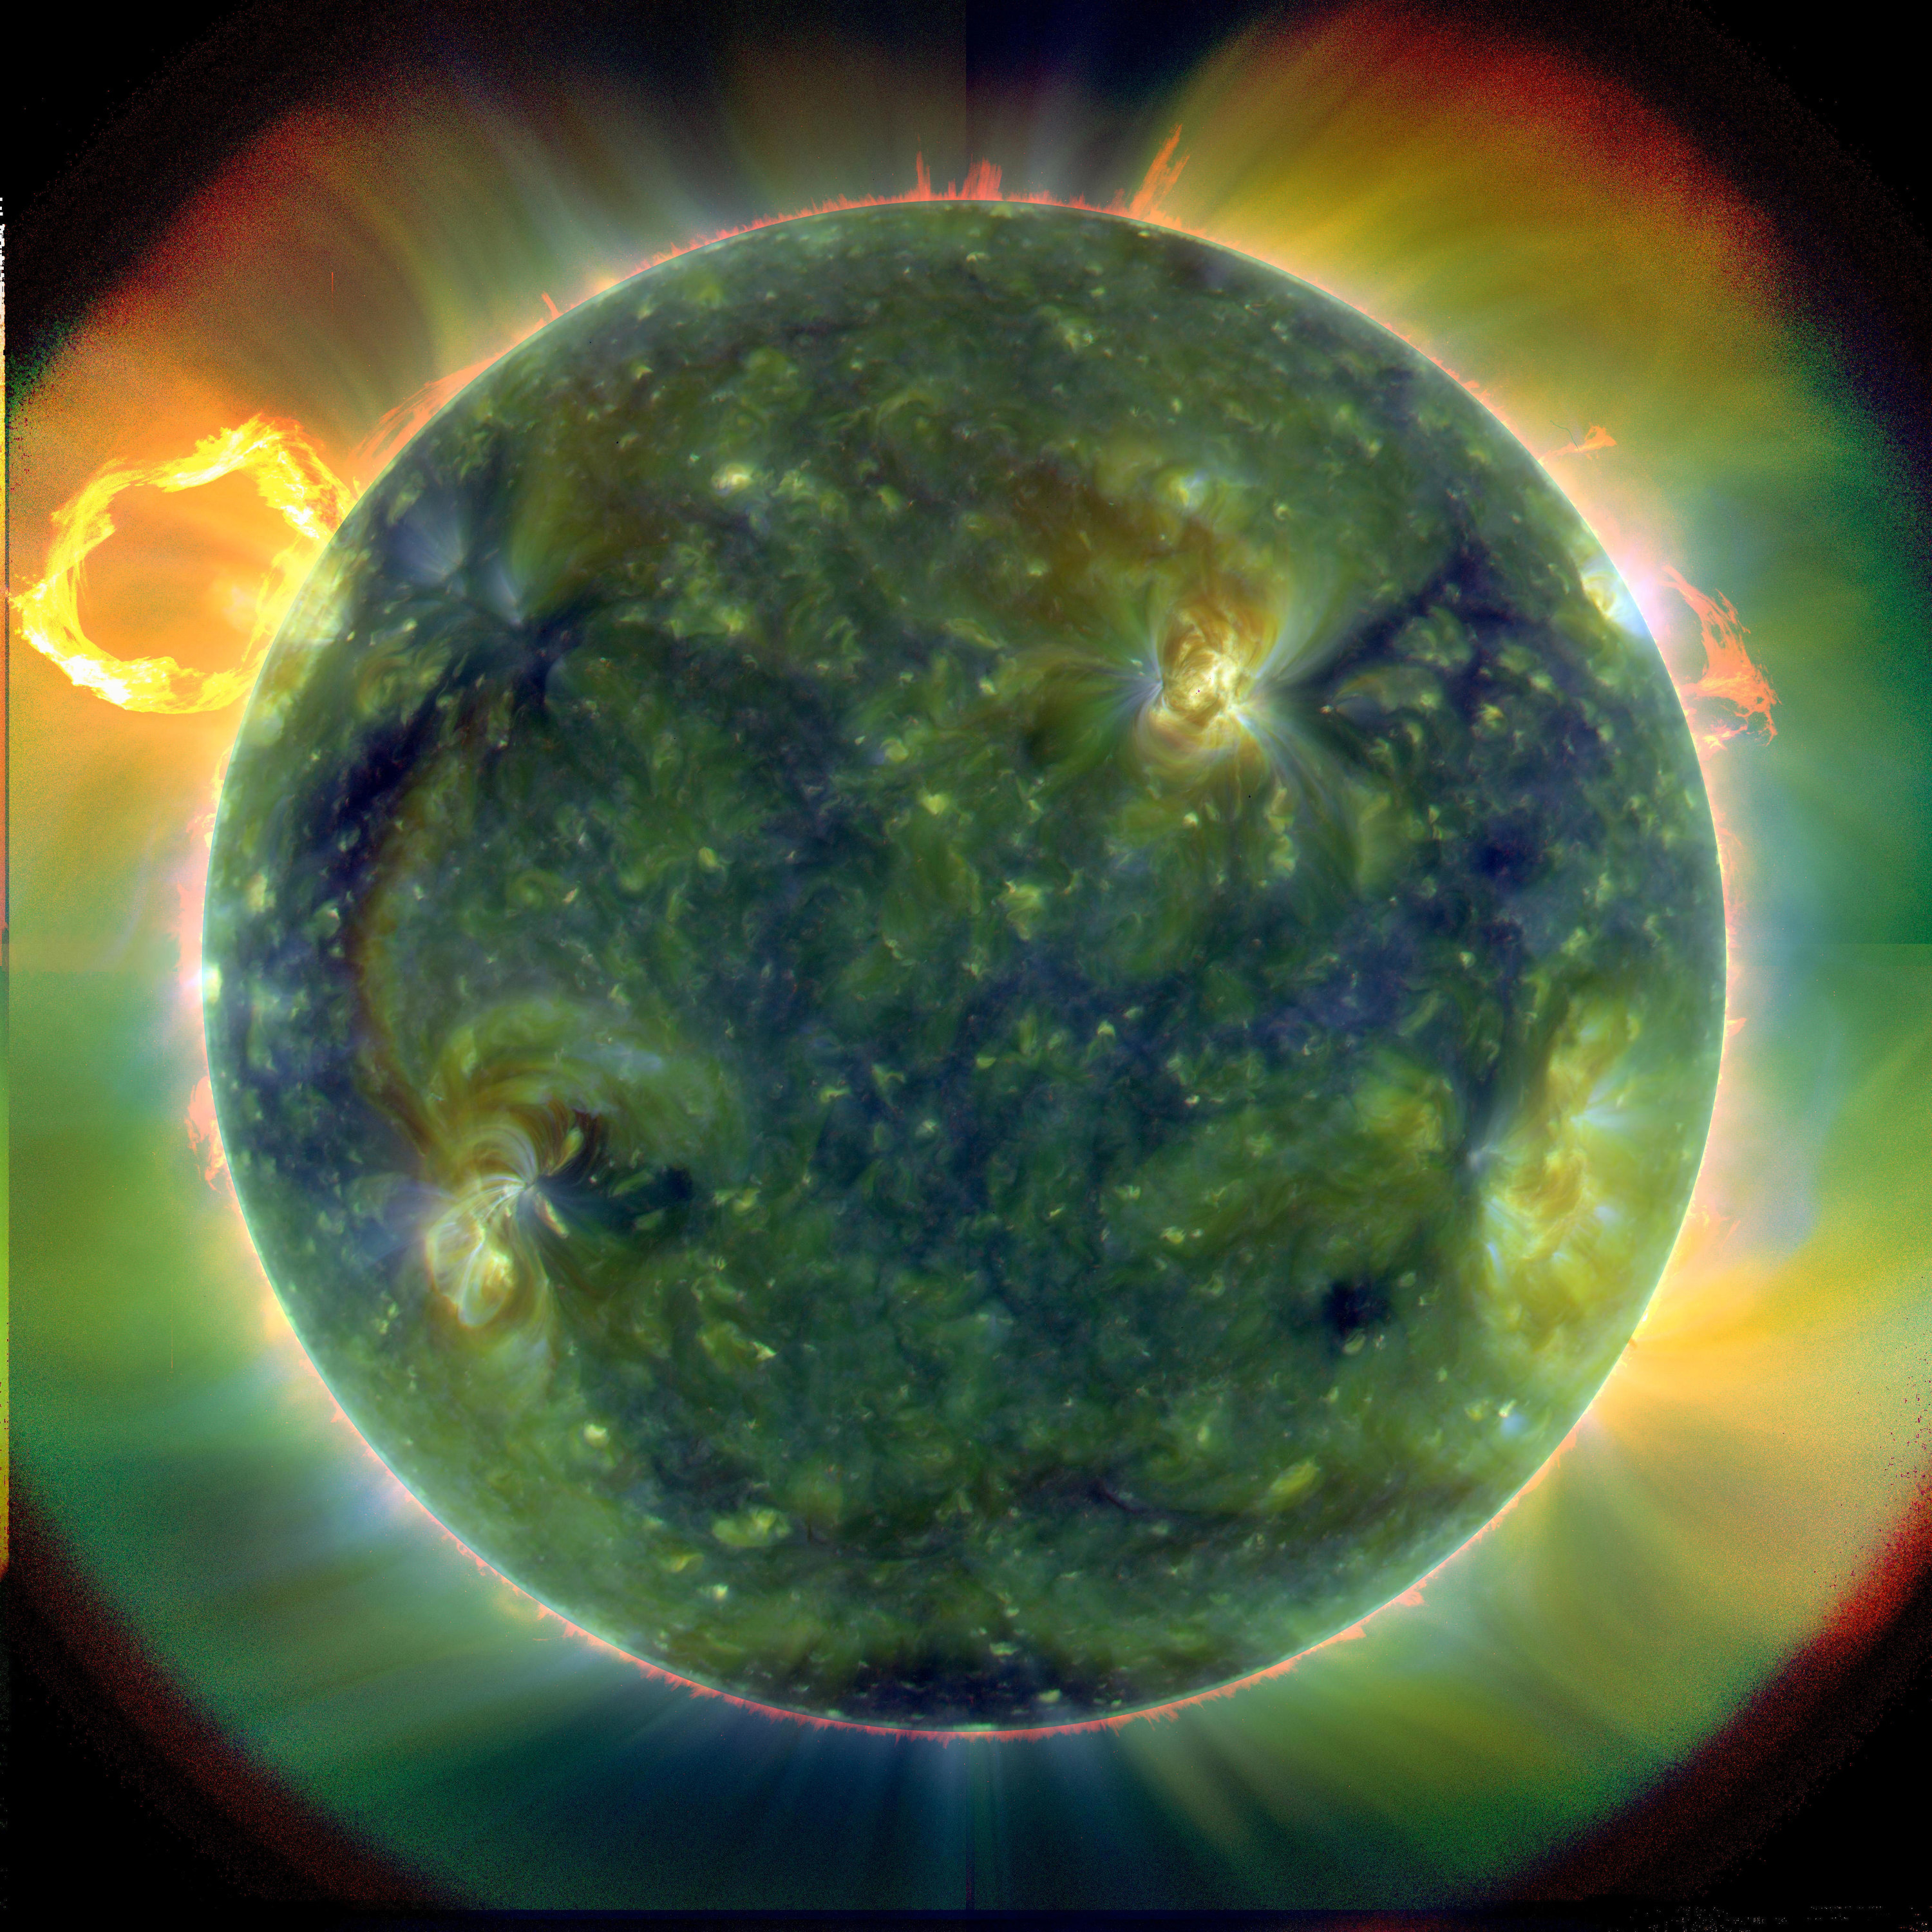 Ultraviolet image of the sun